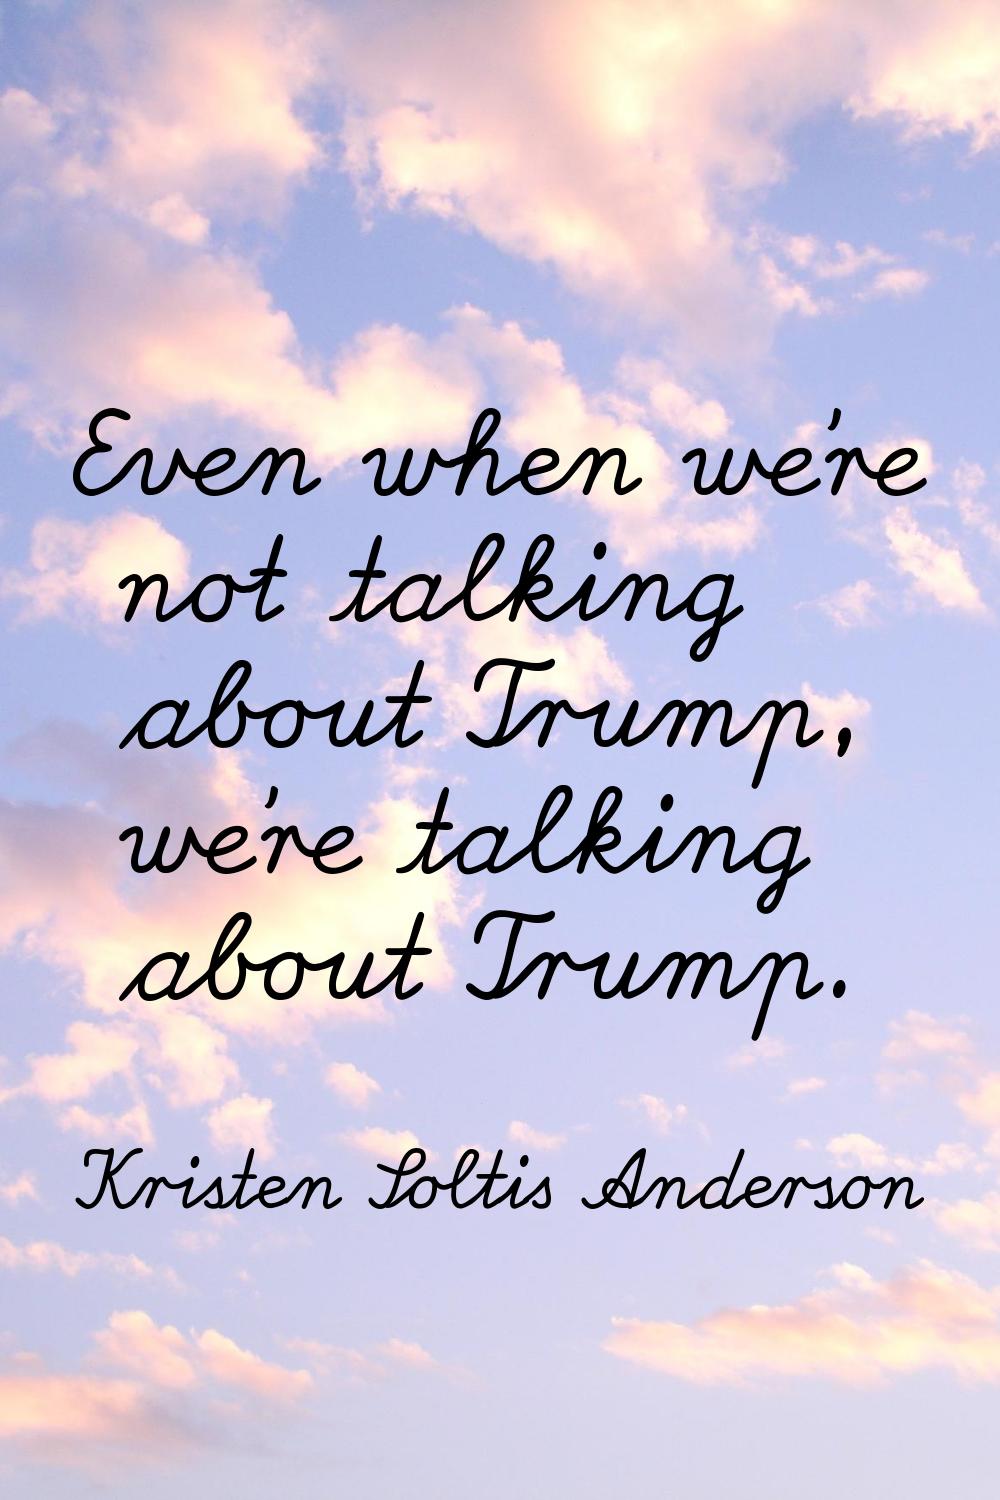 Even when we're not talking about Trump, we're talking about Trump.